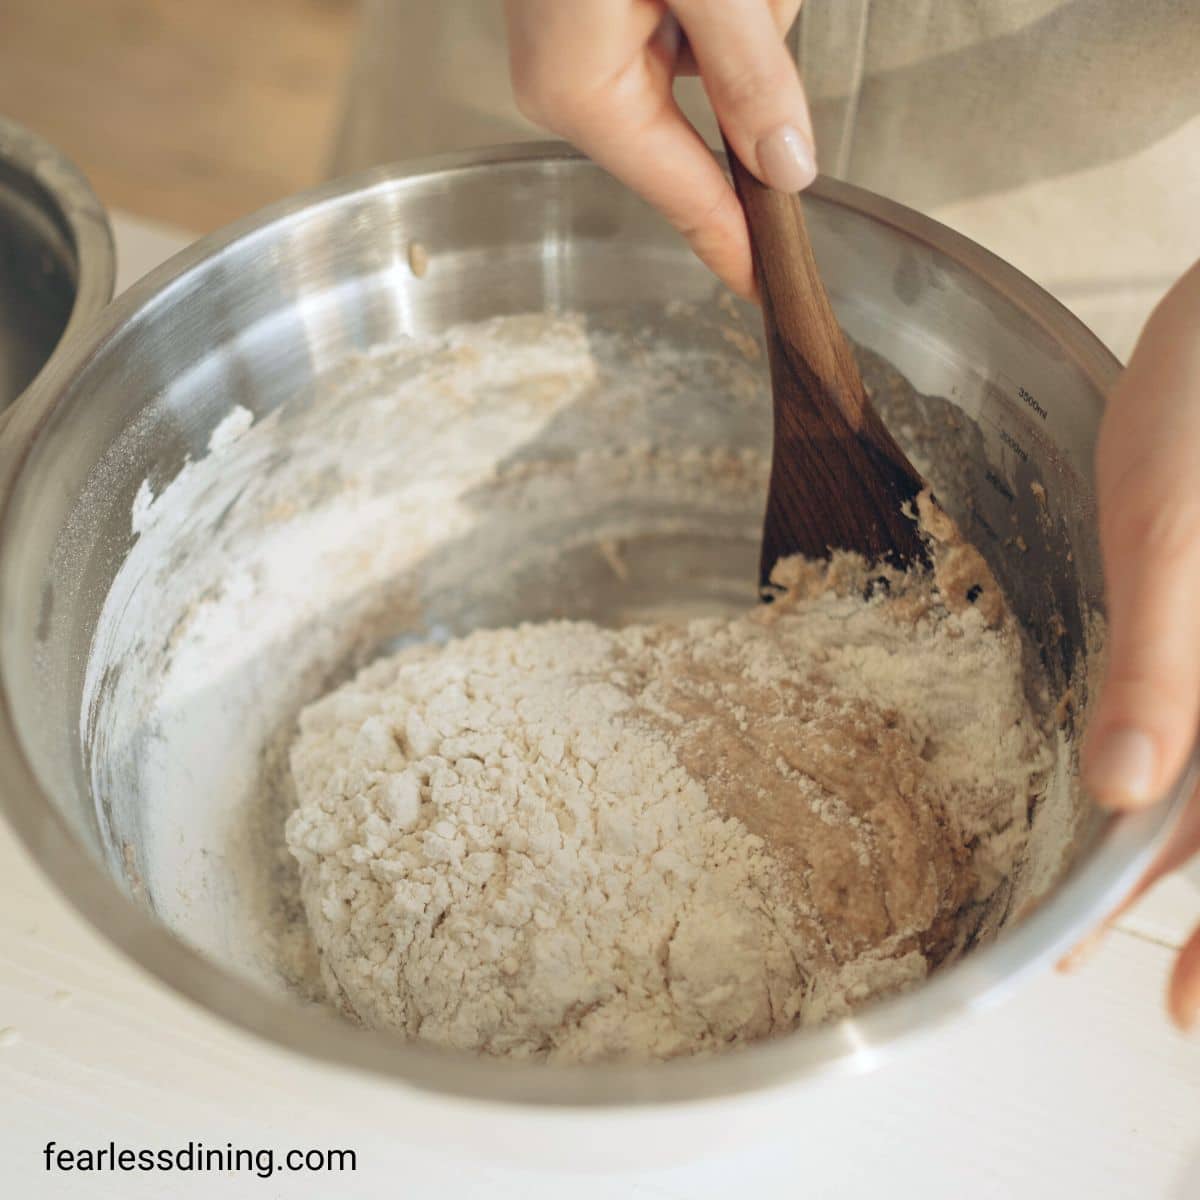 Mixing bread dough ingredients in a big silver bowl.